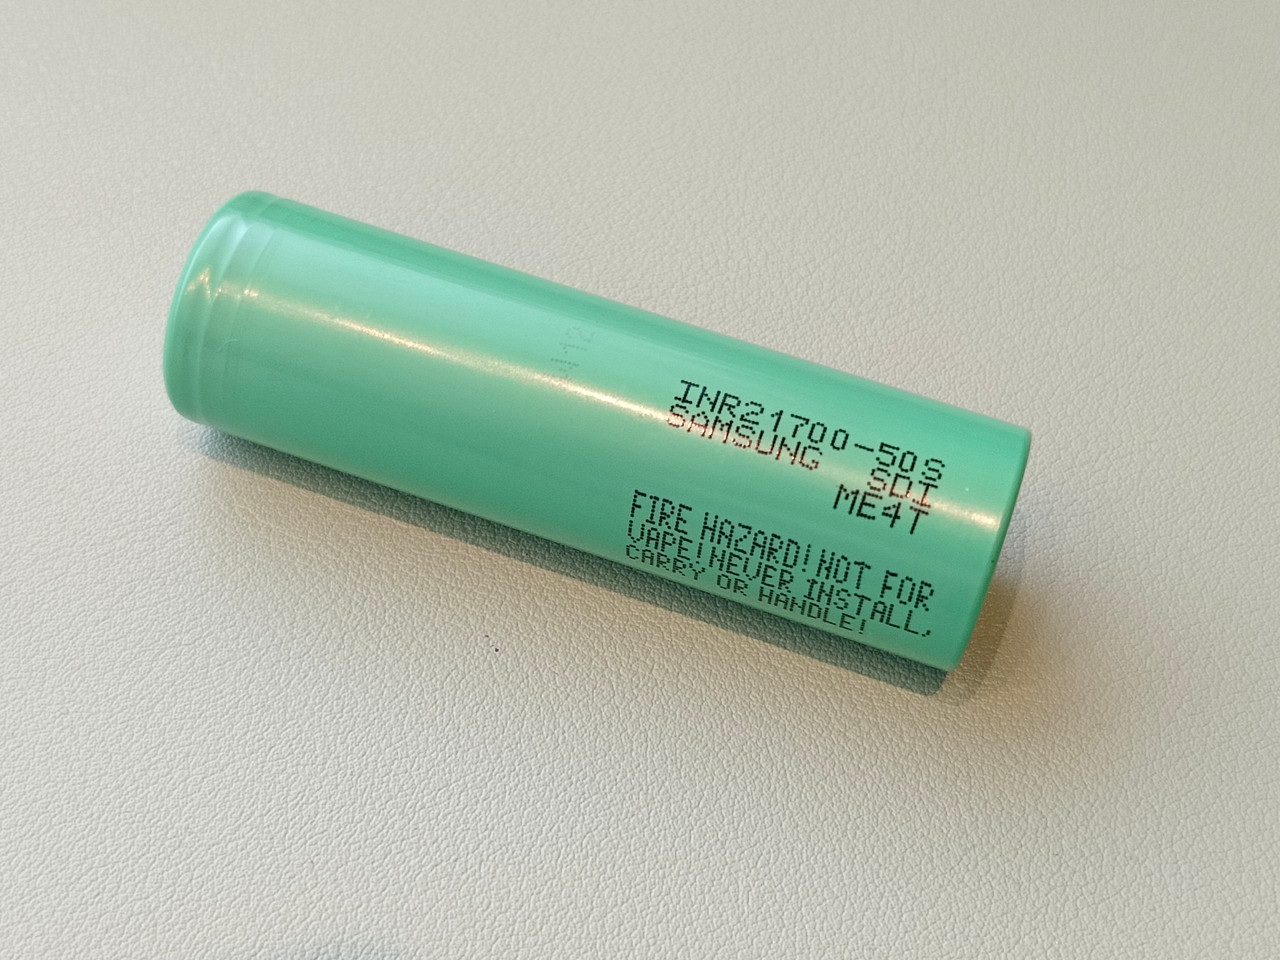 Samsung INR21700 50S 5000mAh 25A High Drain Rechargeable Lithium Battery -  Fstop Lights